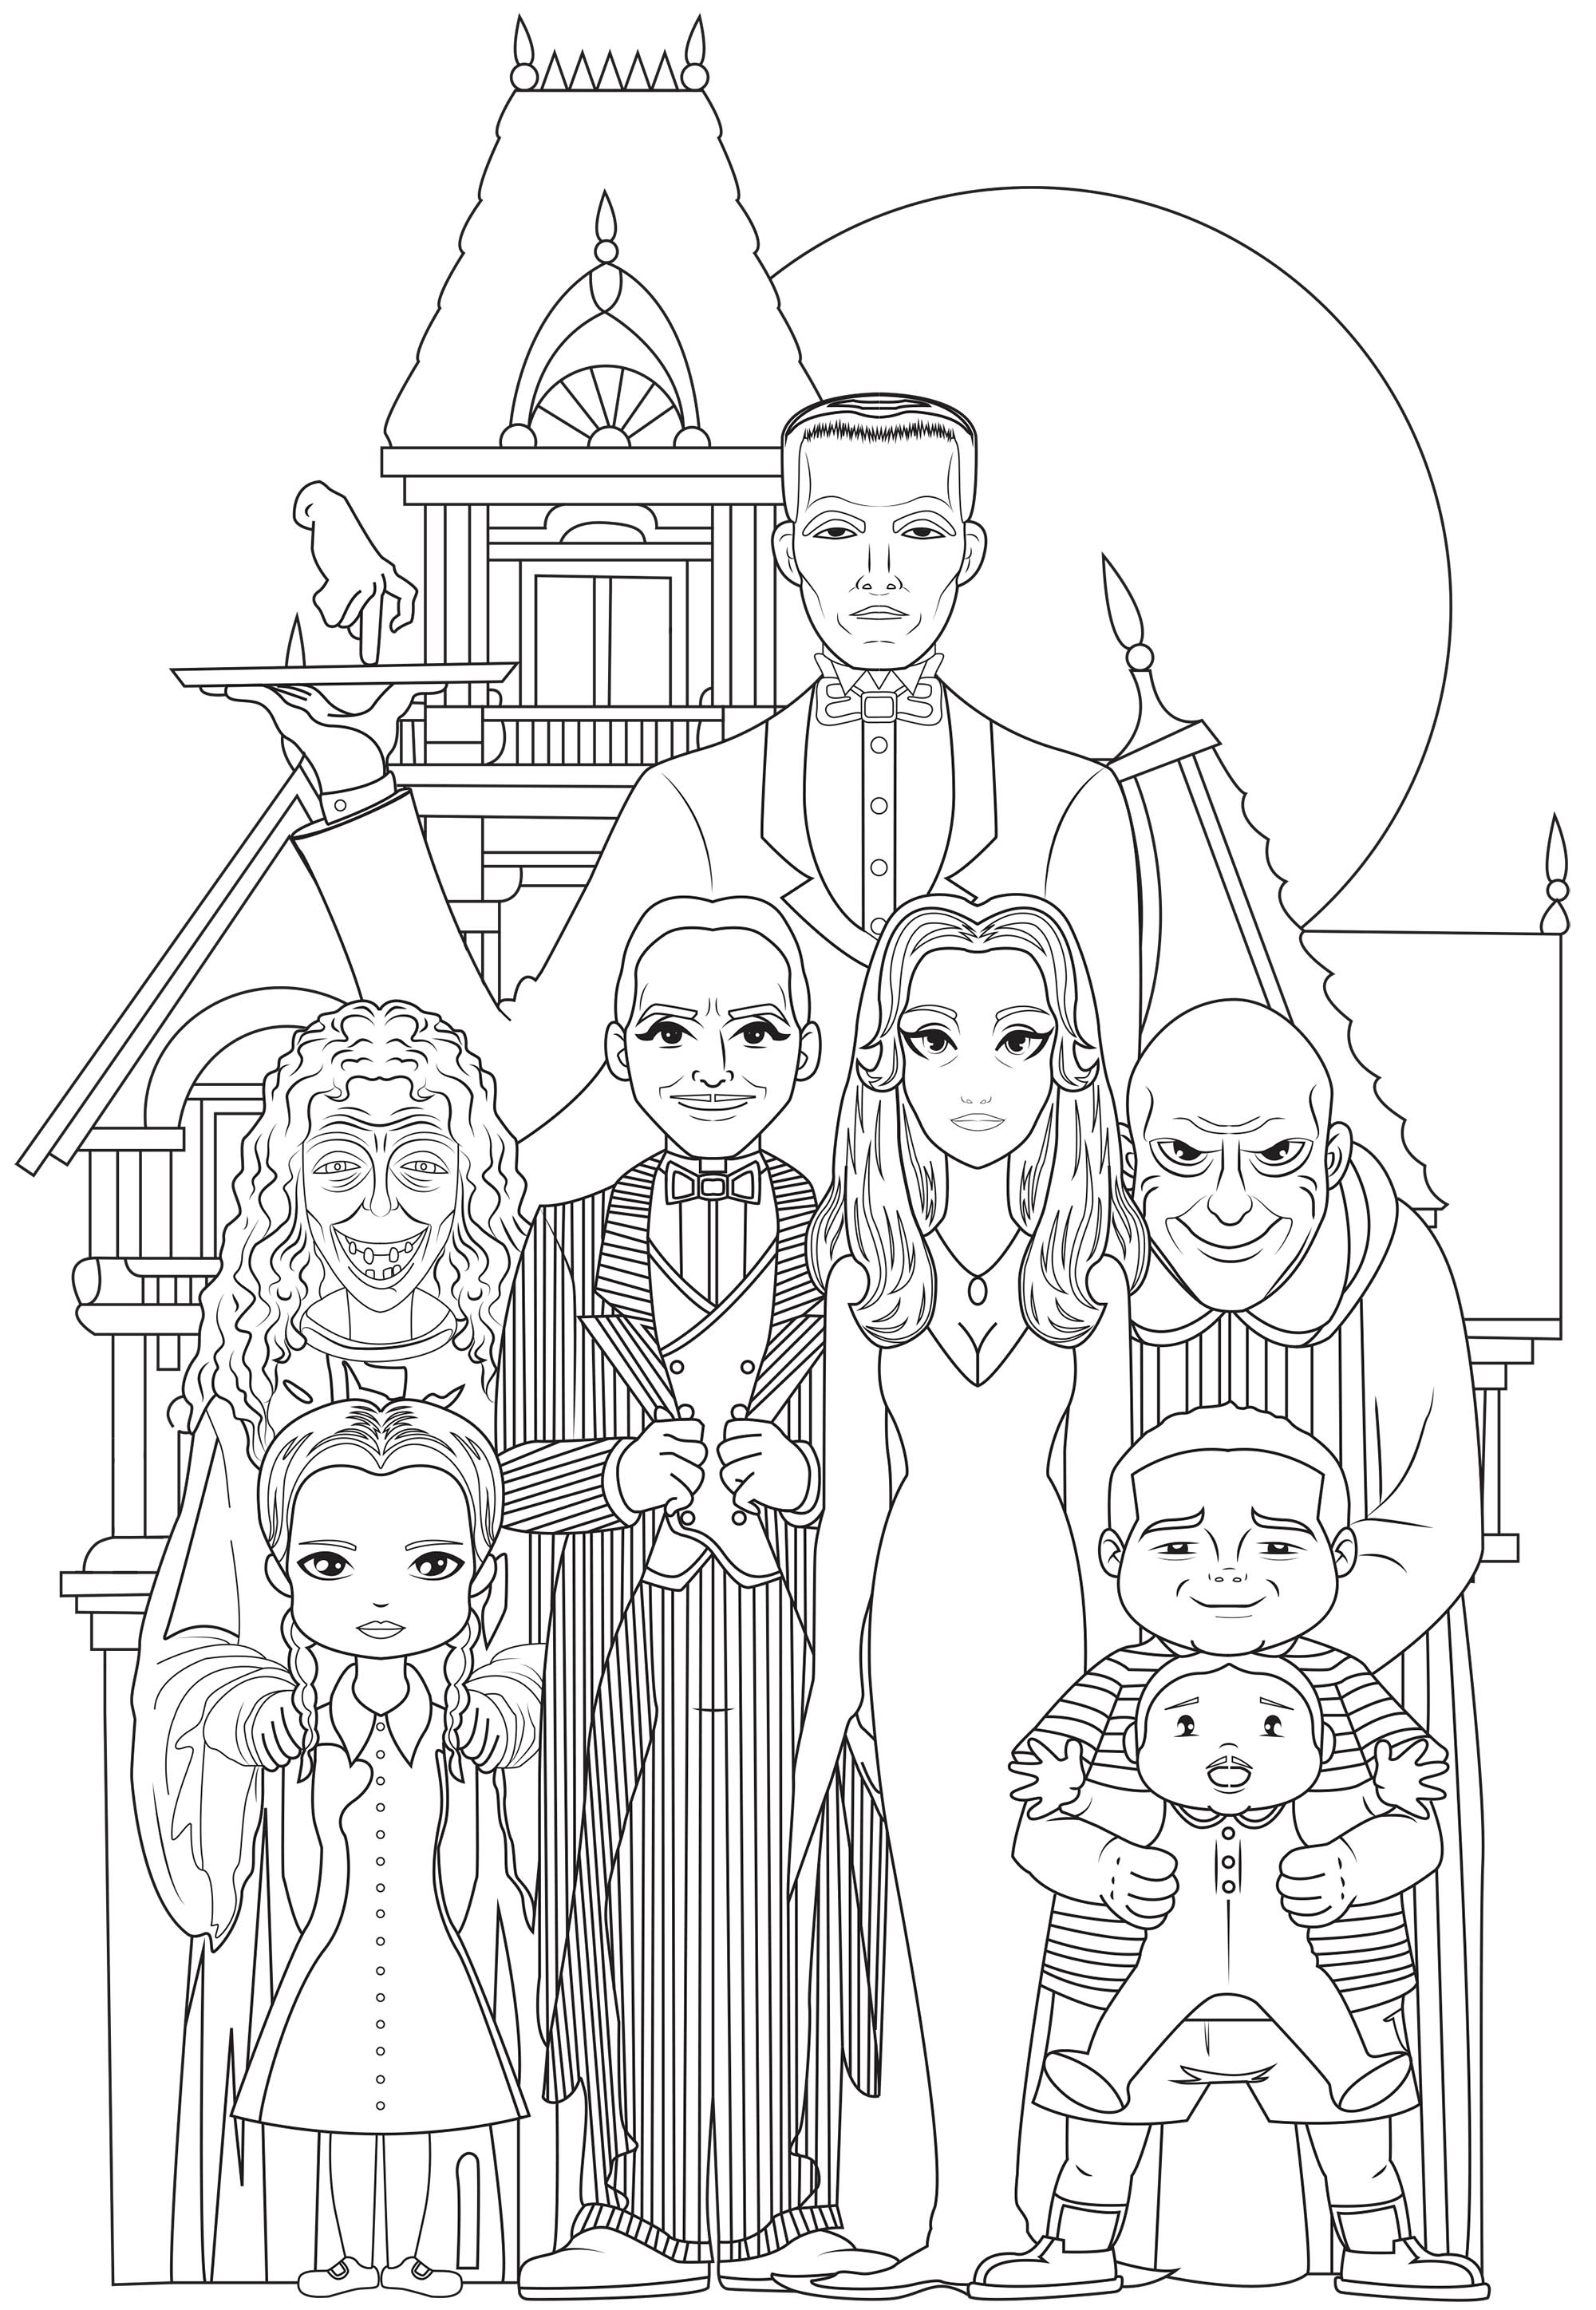 Addams family colouring pages